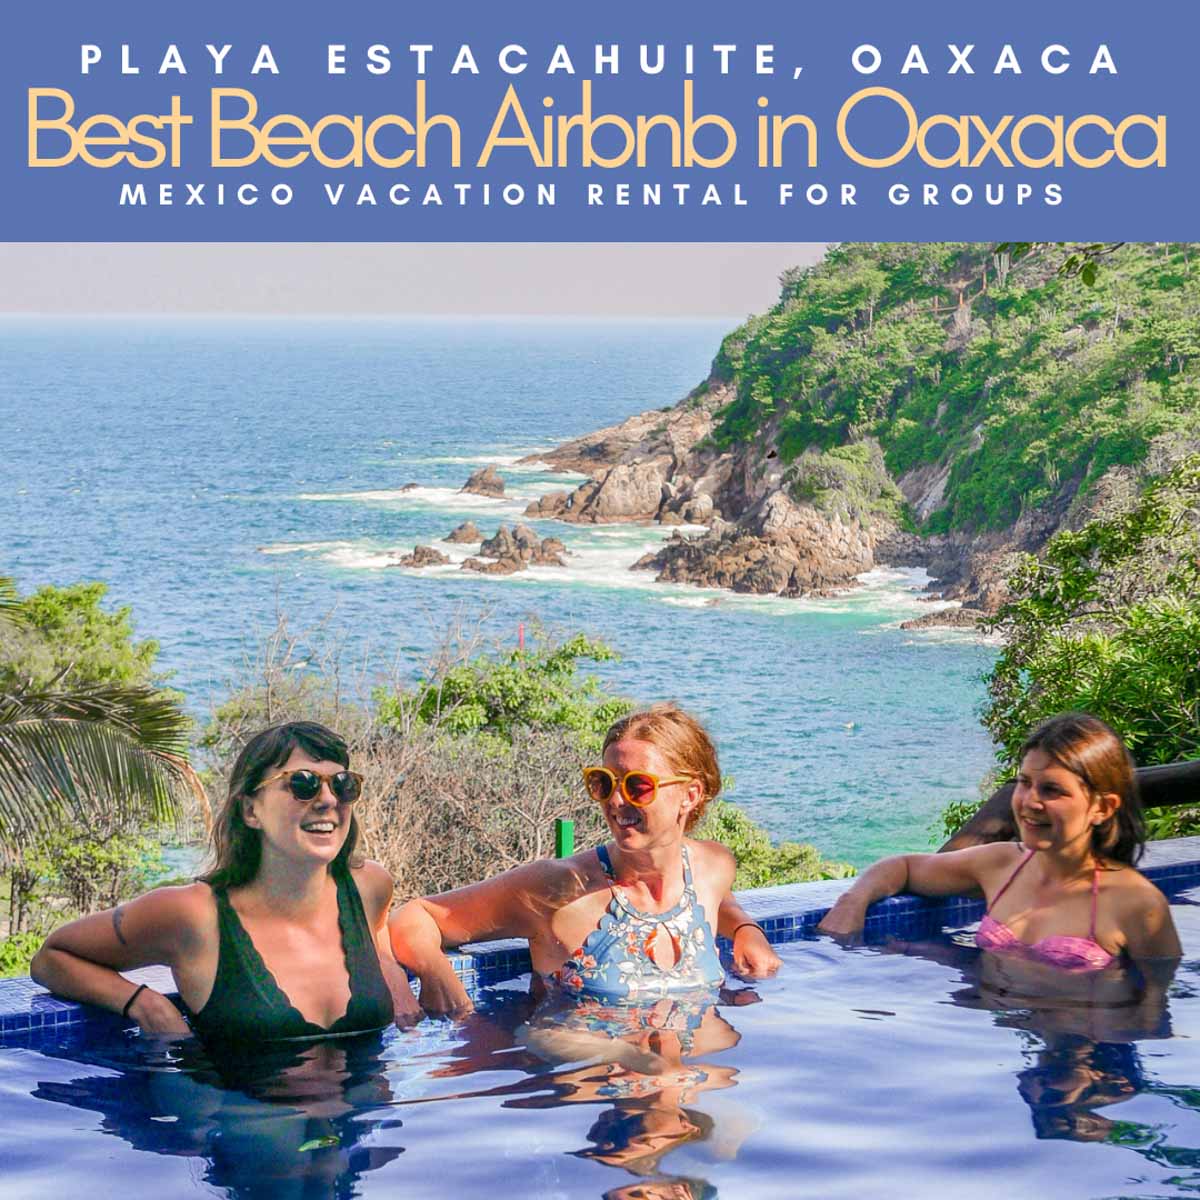 Copy of best beach airbnb in oaxaca for groups, mexico vacation